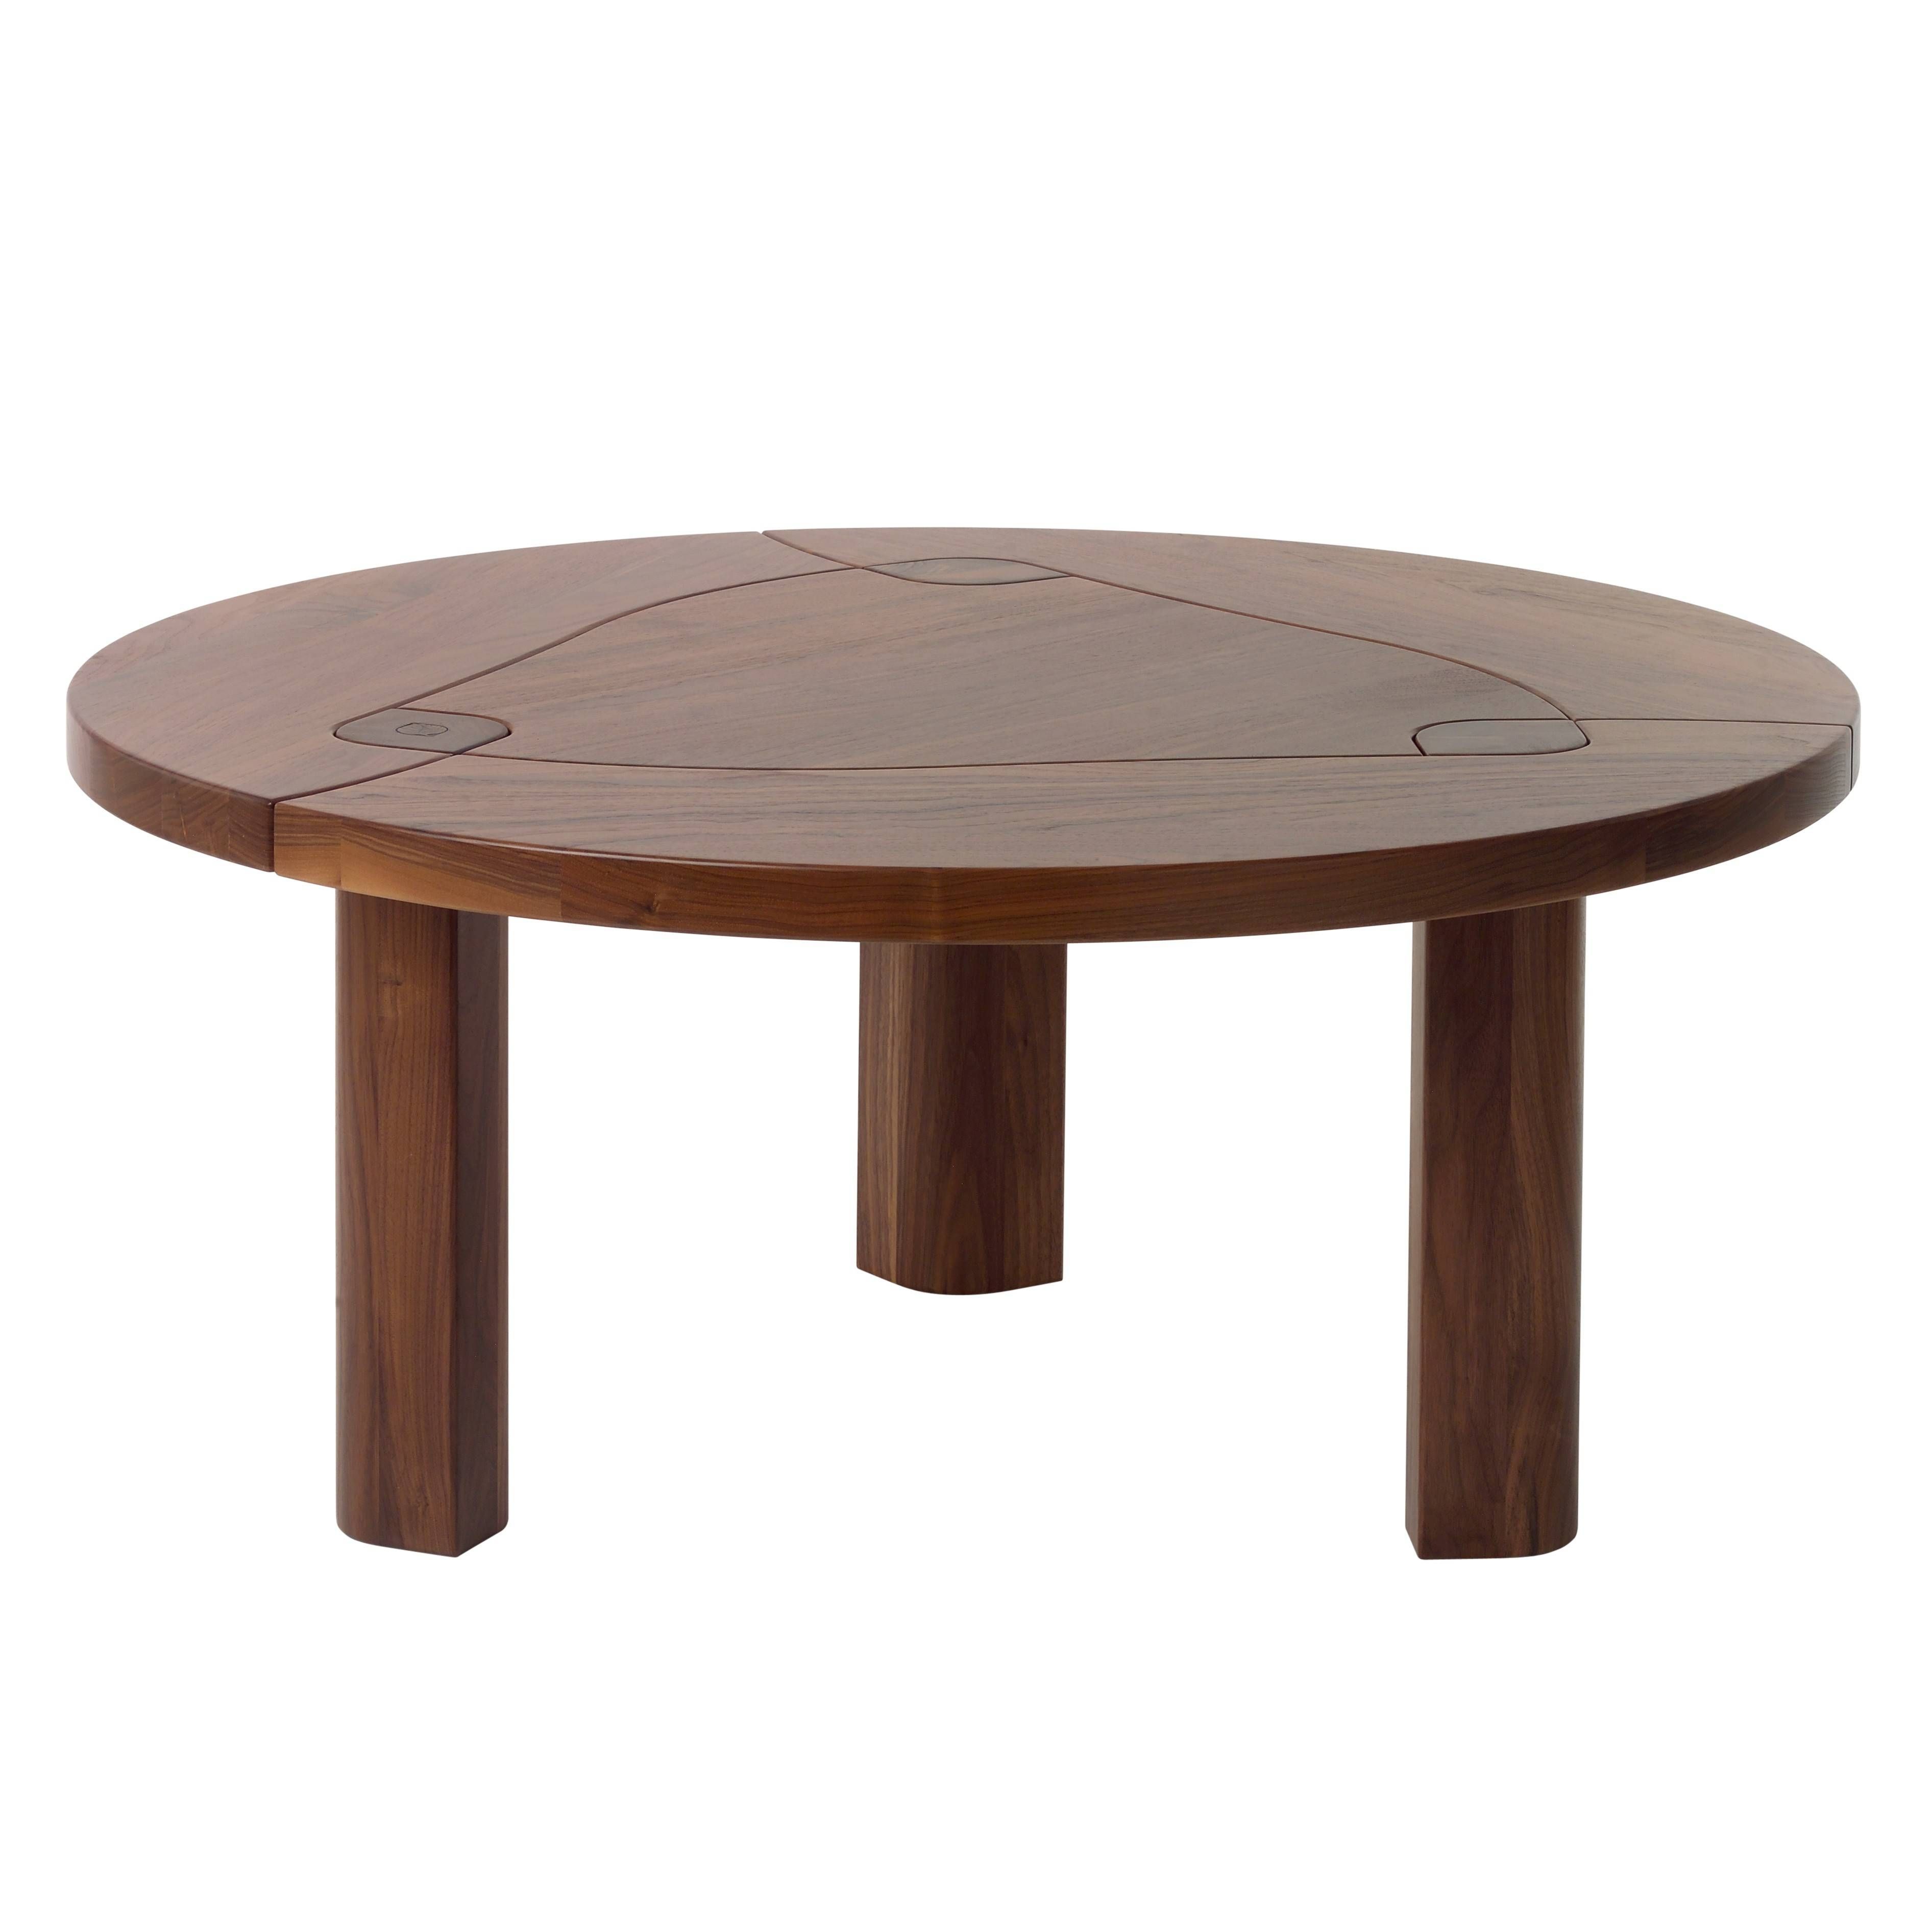 Small Round Coffee Table In Modern Wood Coffee Table Trend Within Small Round Coffee Tables (View 12 of 30)